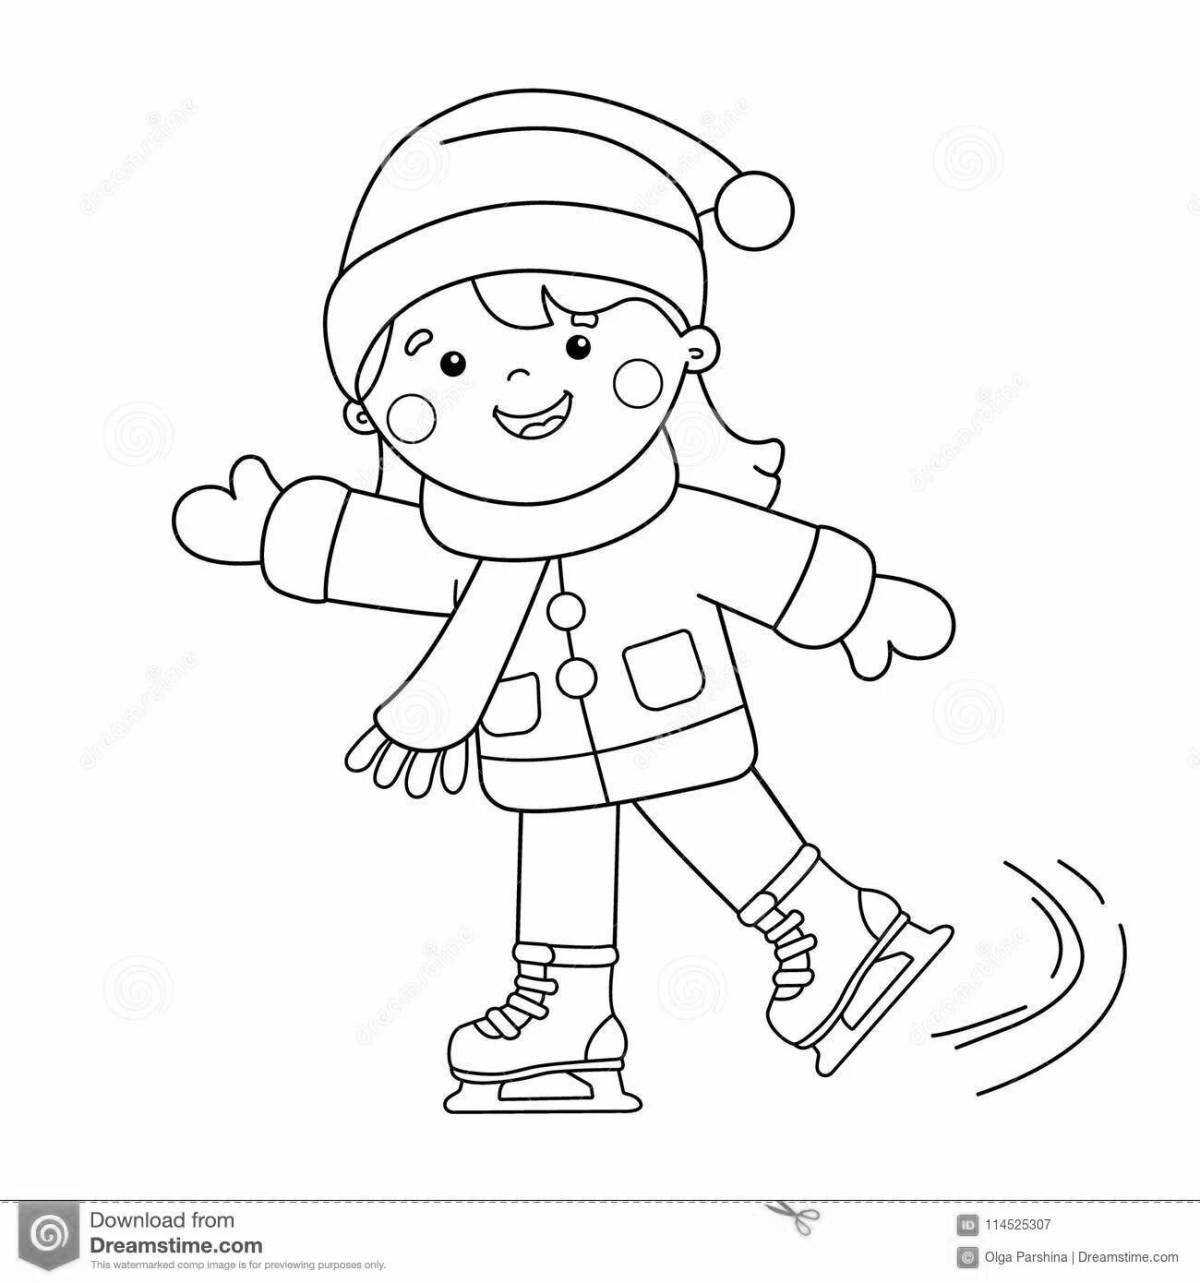 Colorful ice rink coloring page